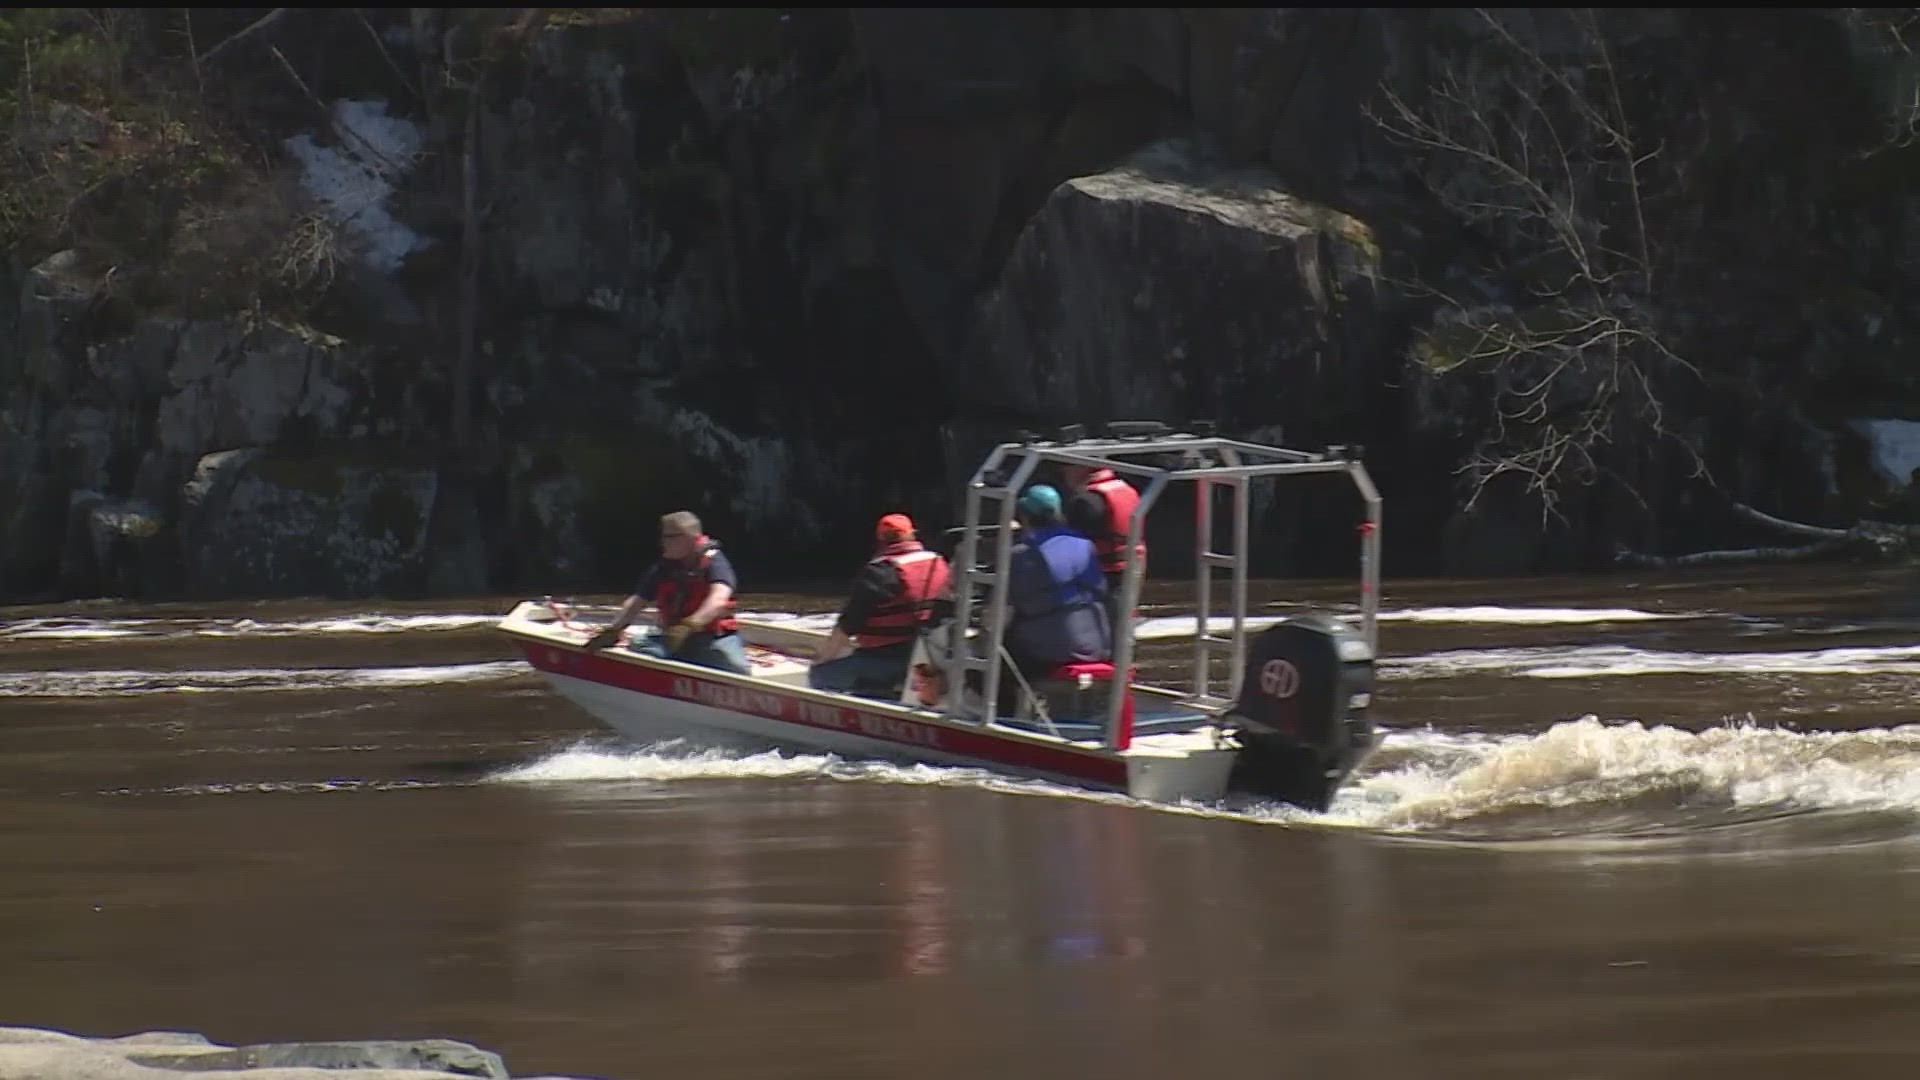 Officials in Chisago County confirmed Sunday that a body pulled from the river on Friday, May 26 was identified as 18-year-old D'Andrea Sanvig.